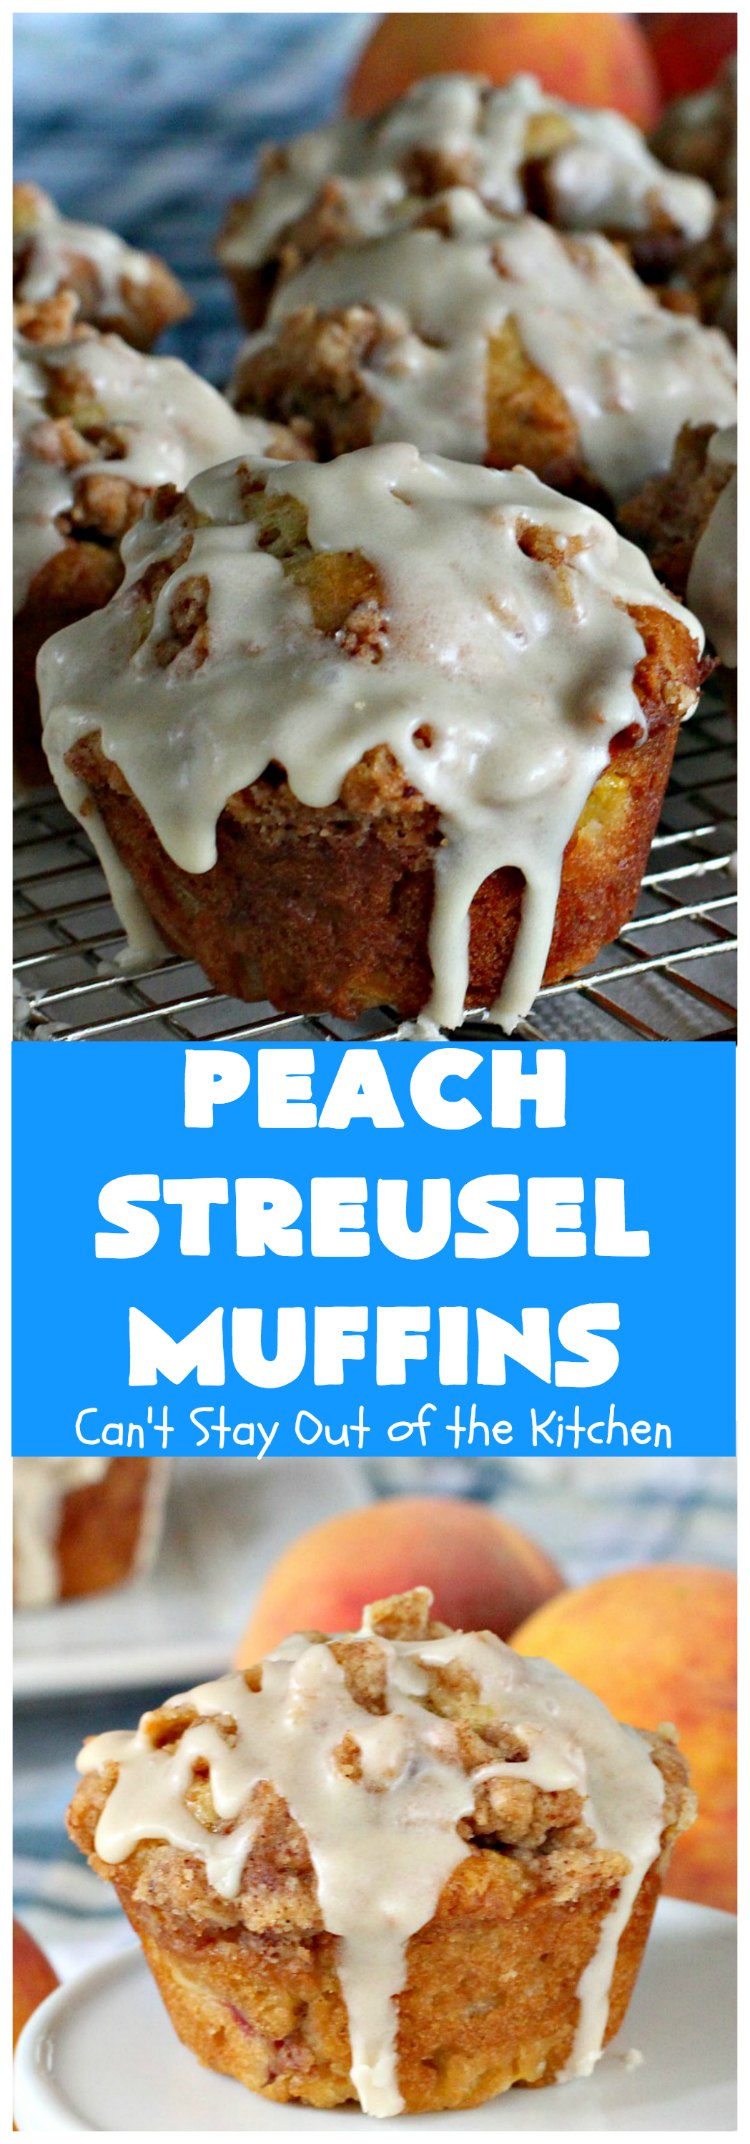 Peach Streusel Muffins | Can't Stay Out of the Kitchen